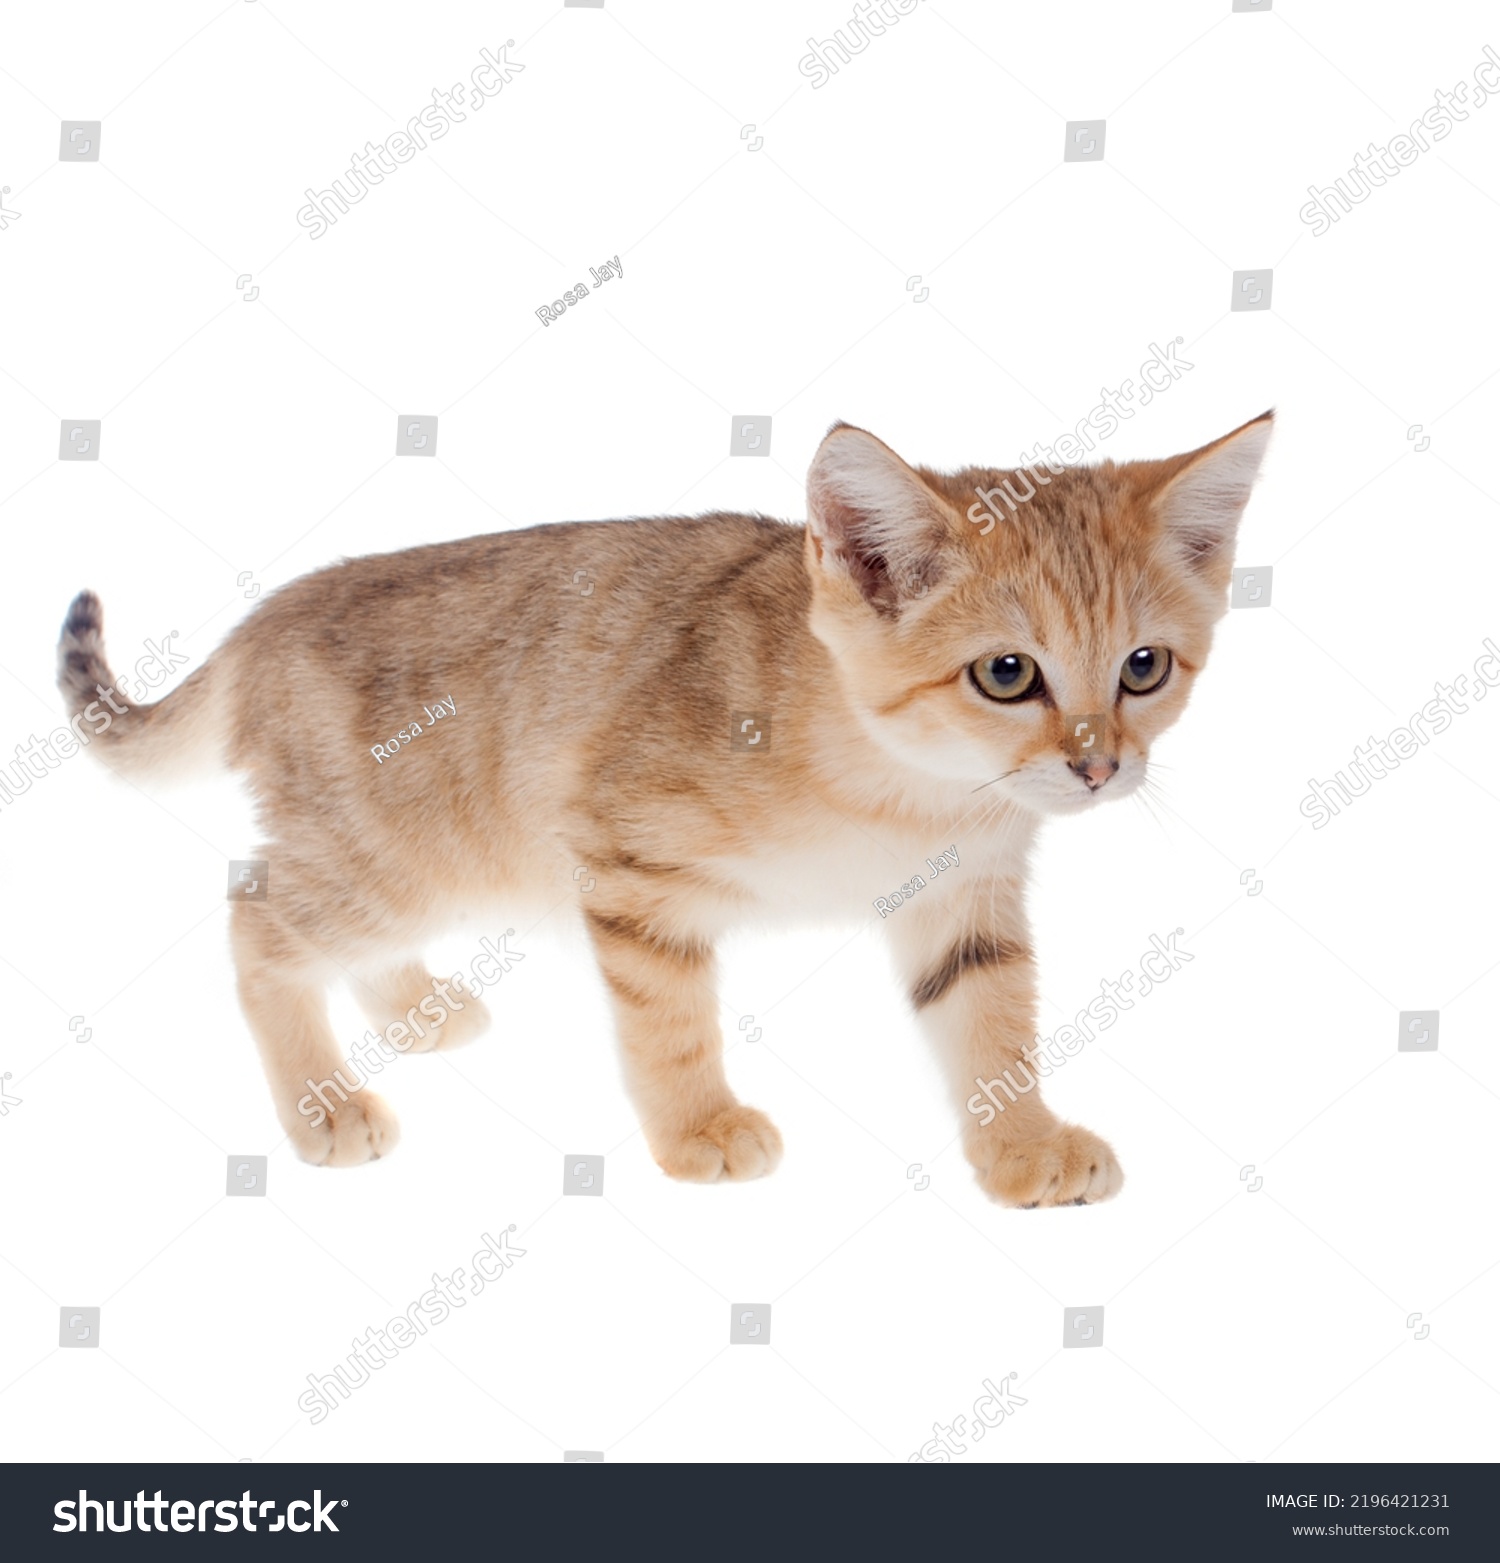 The Sand dune cat isolated on white #2196421231